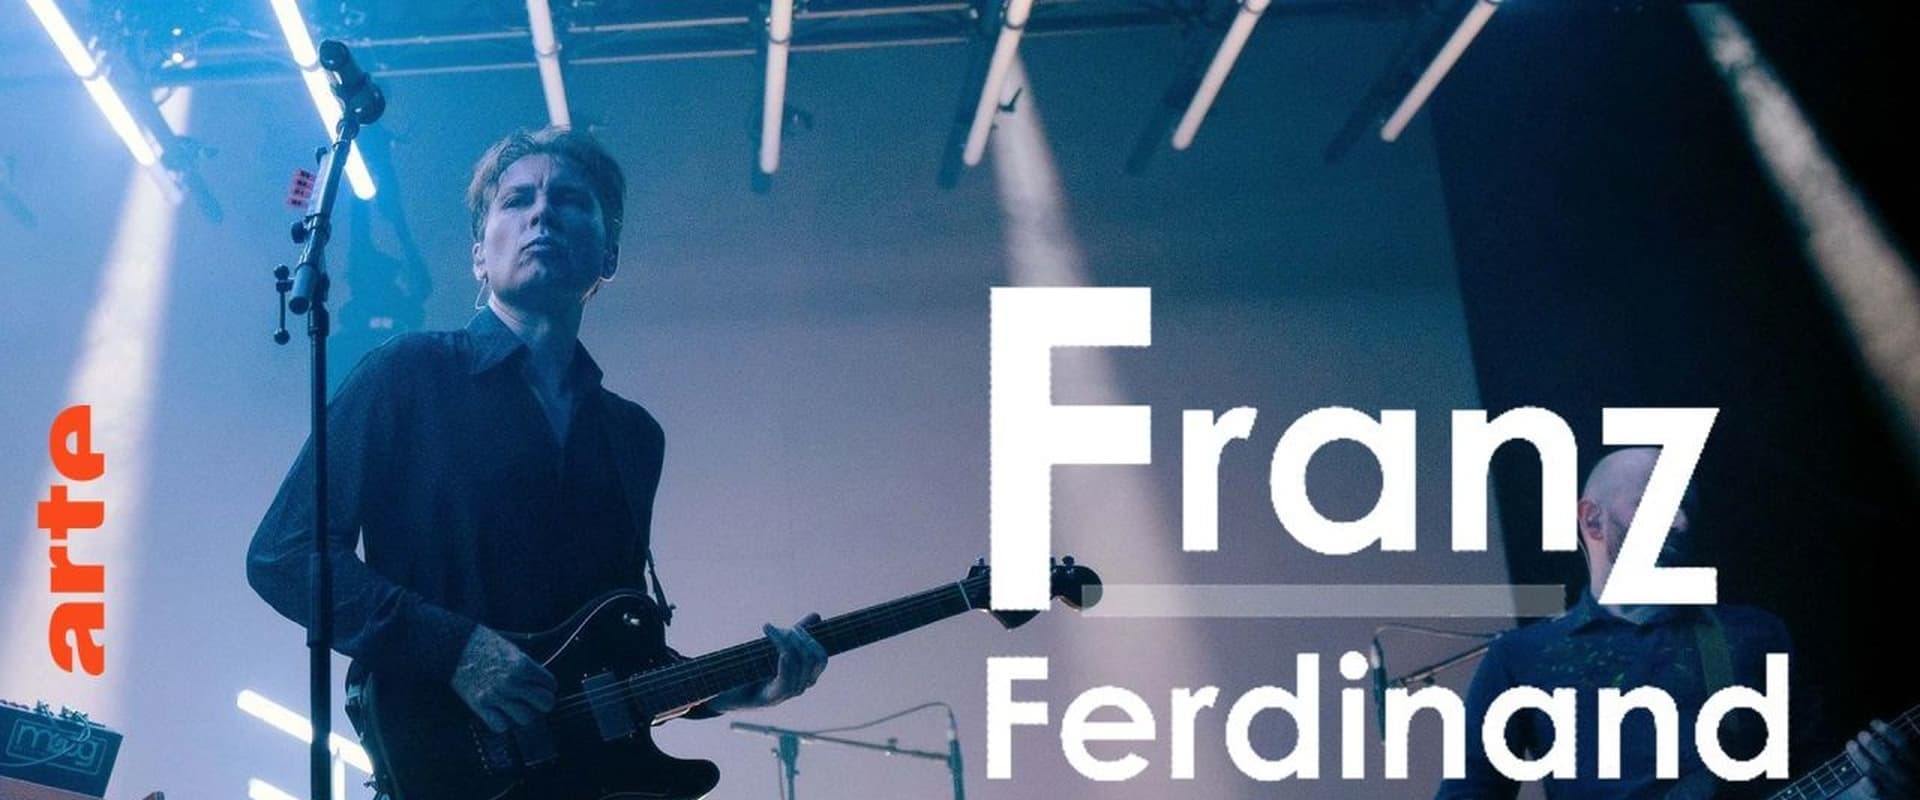 Franz Ferdinand | Echoes with Jehnny Beth (ARTE concerts)